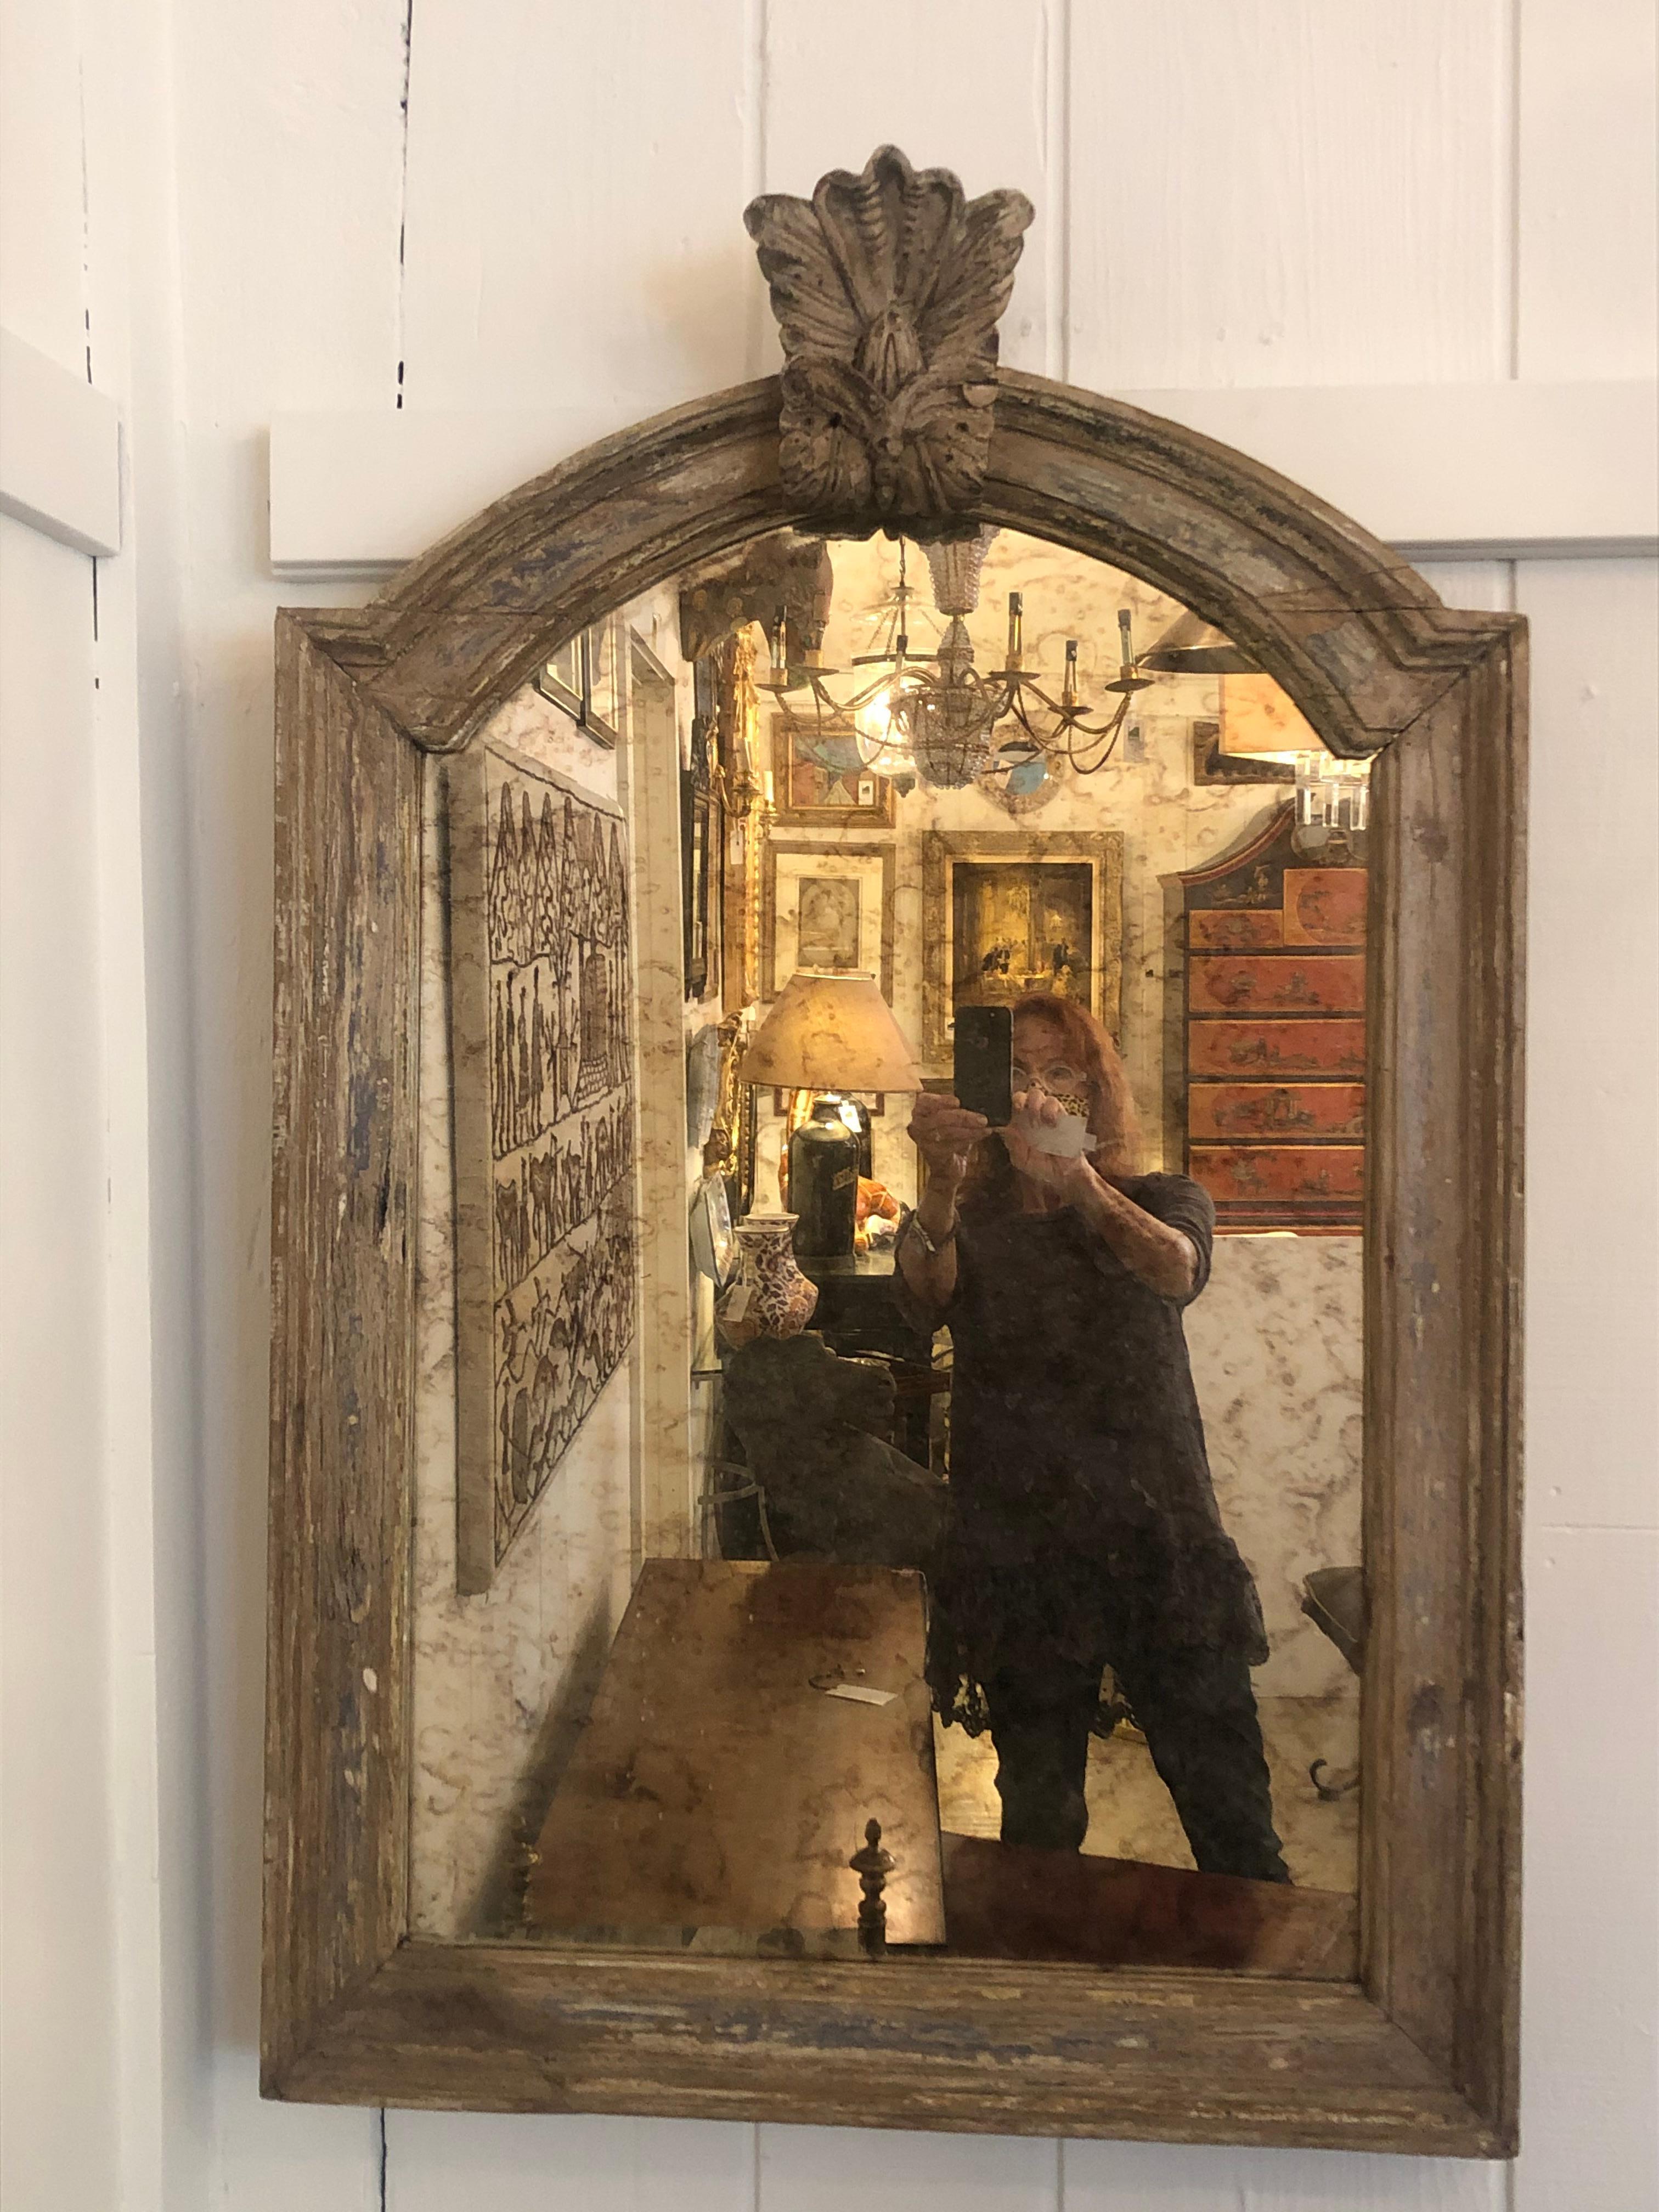 A charming rustic painted and carved wooden mirror having lovely decorative crest at the top and fabulous antiqued mirror. The aged molding is naturally distressed wood with some vestiges of grey, red oxide and cream paint.